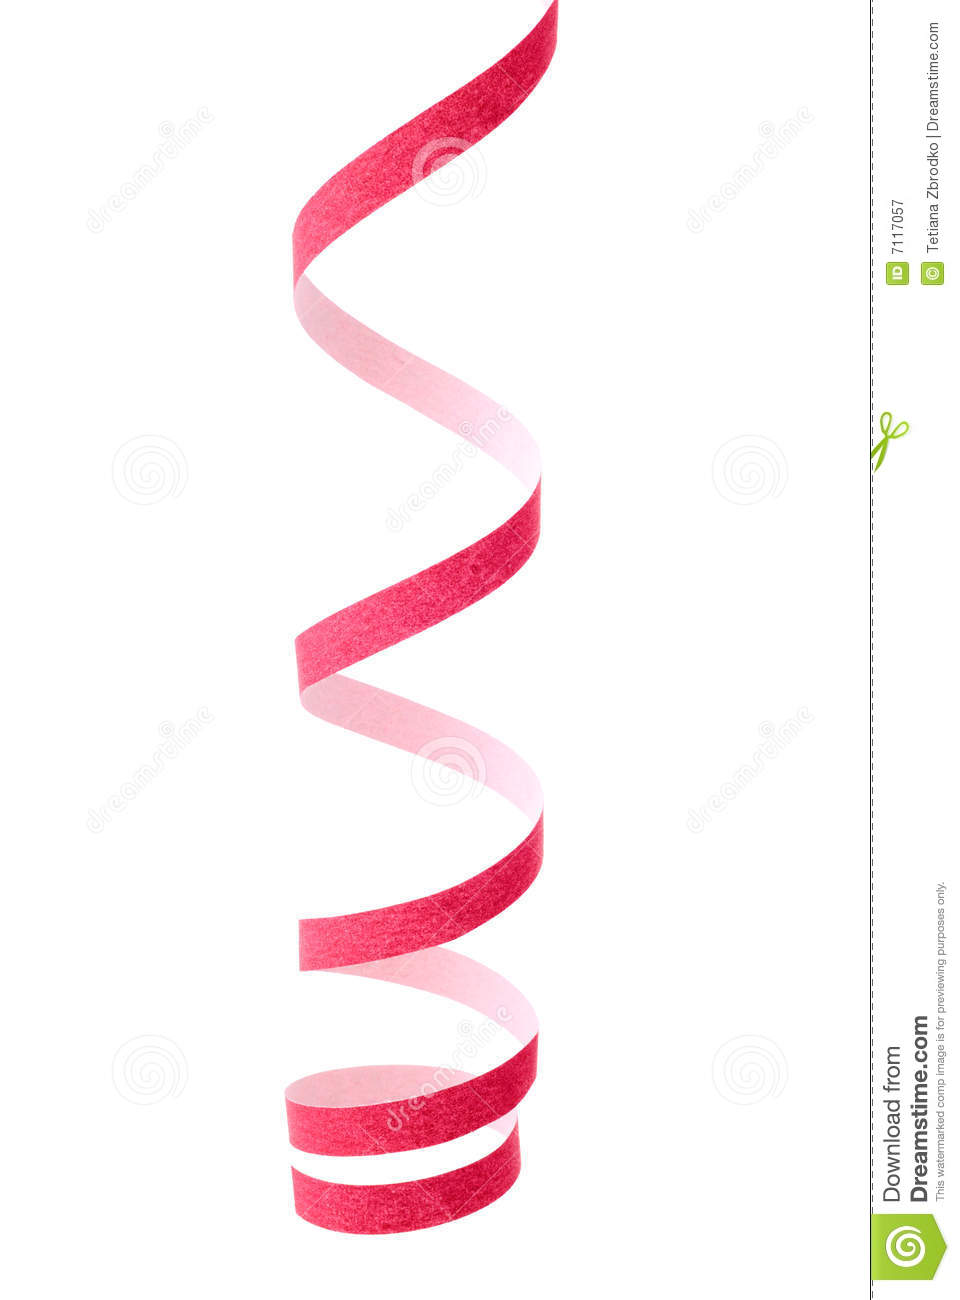 Red Streamer Royalty Free Stock Photography   Image  7117057